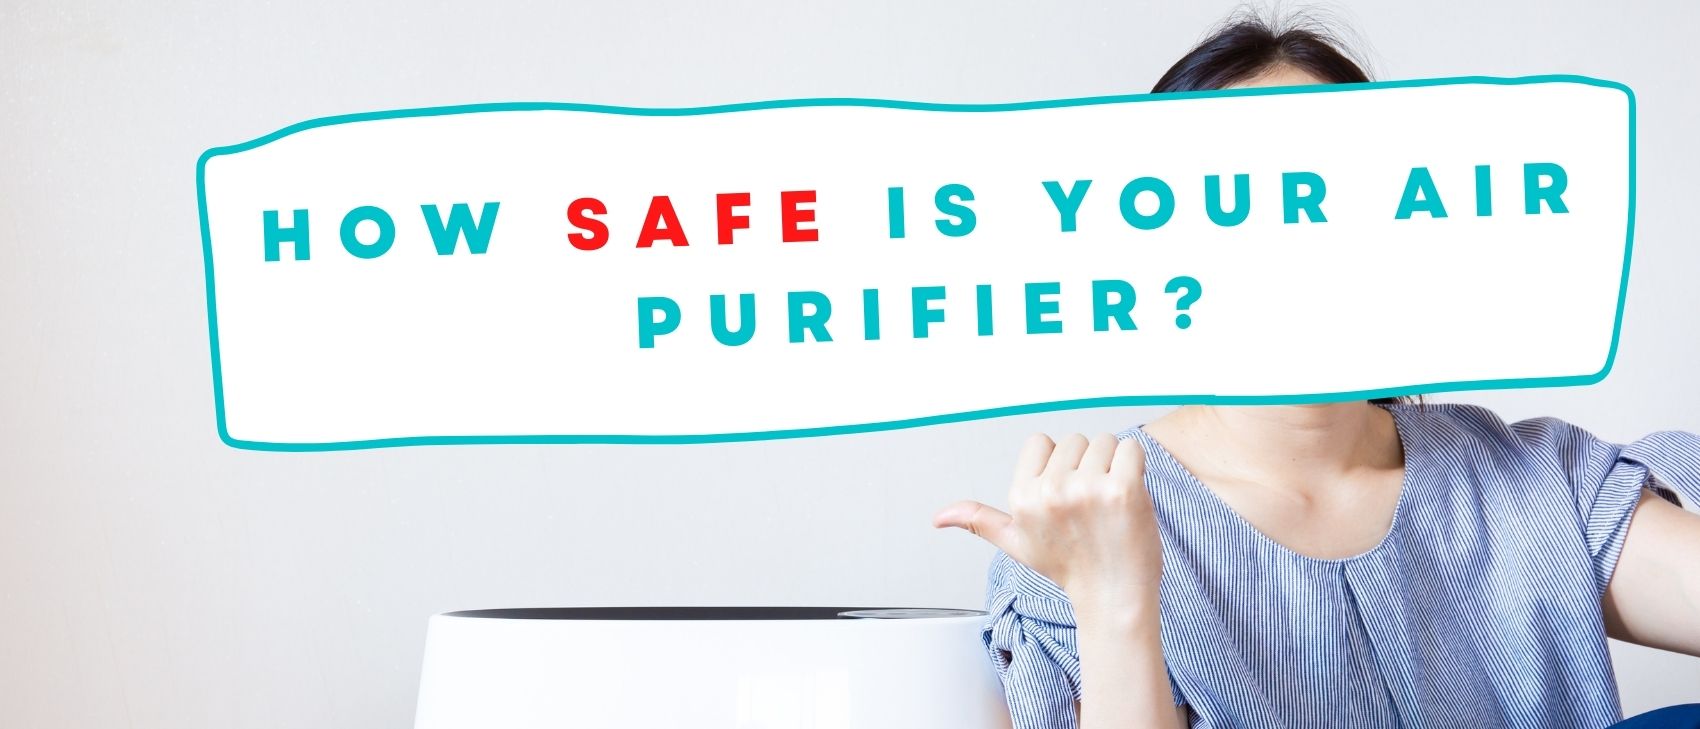 How Safe Is Your Air Purifier?